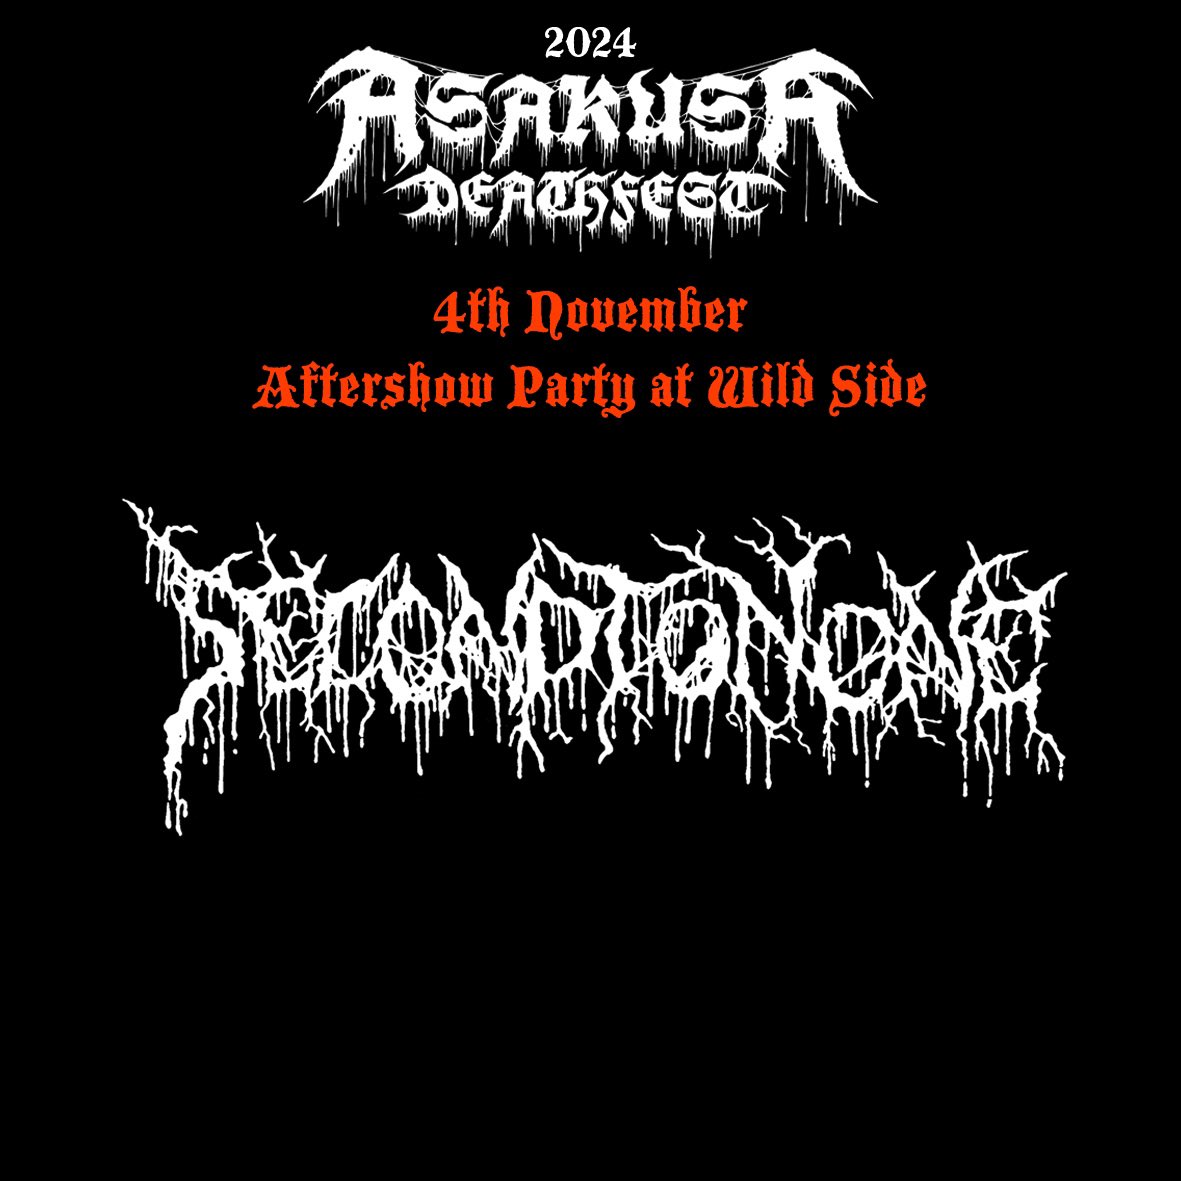 SECOND TO NONE x Asakusa Deathfest 2024

Exclusively AfterShow Party at Wild Side